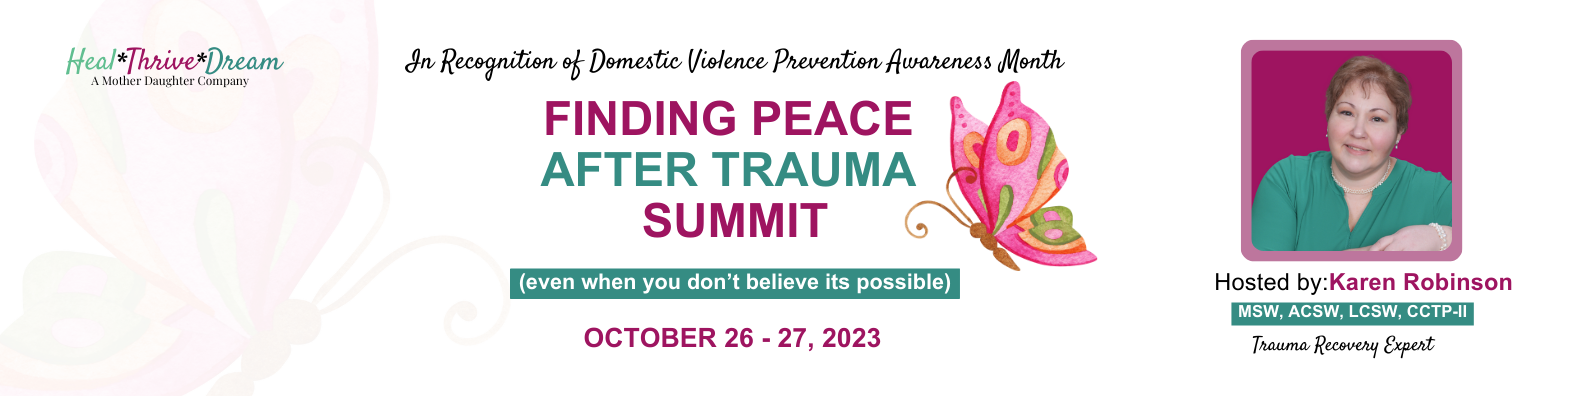 Finding Peace After Trauma
Summit